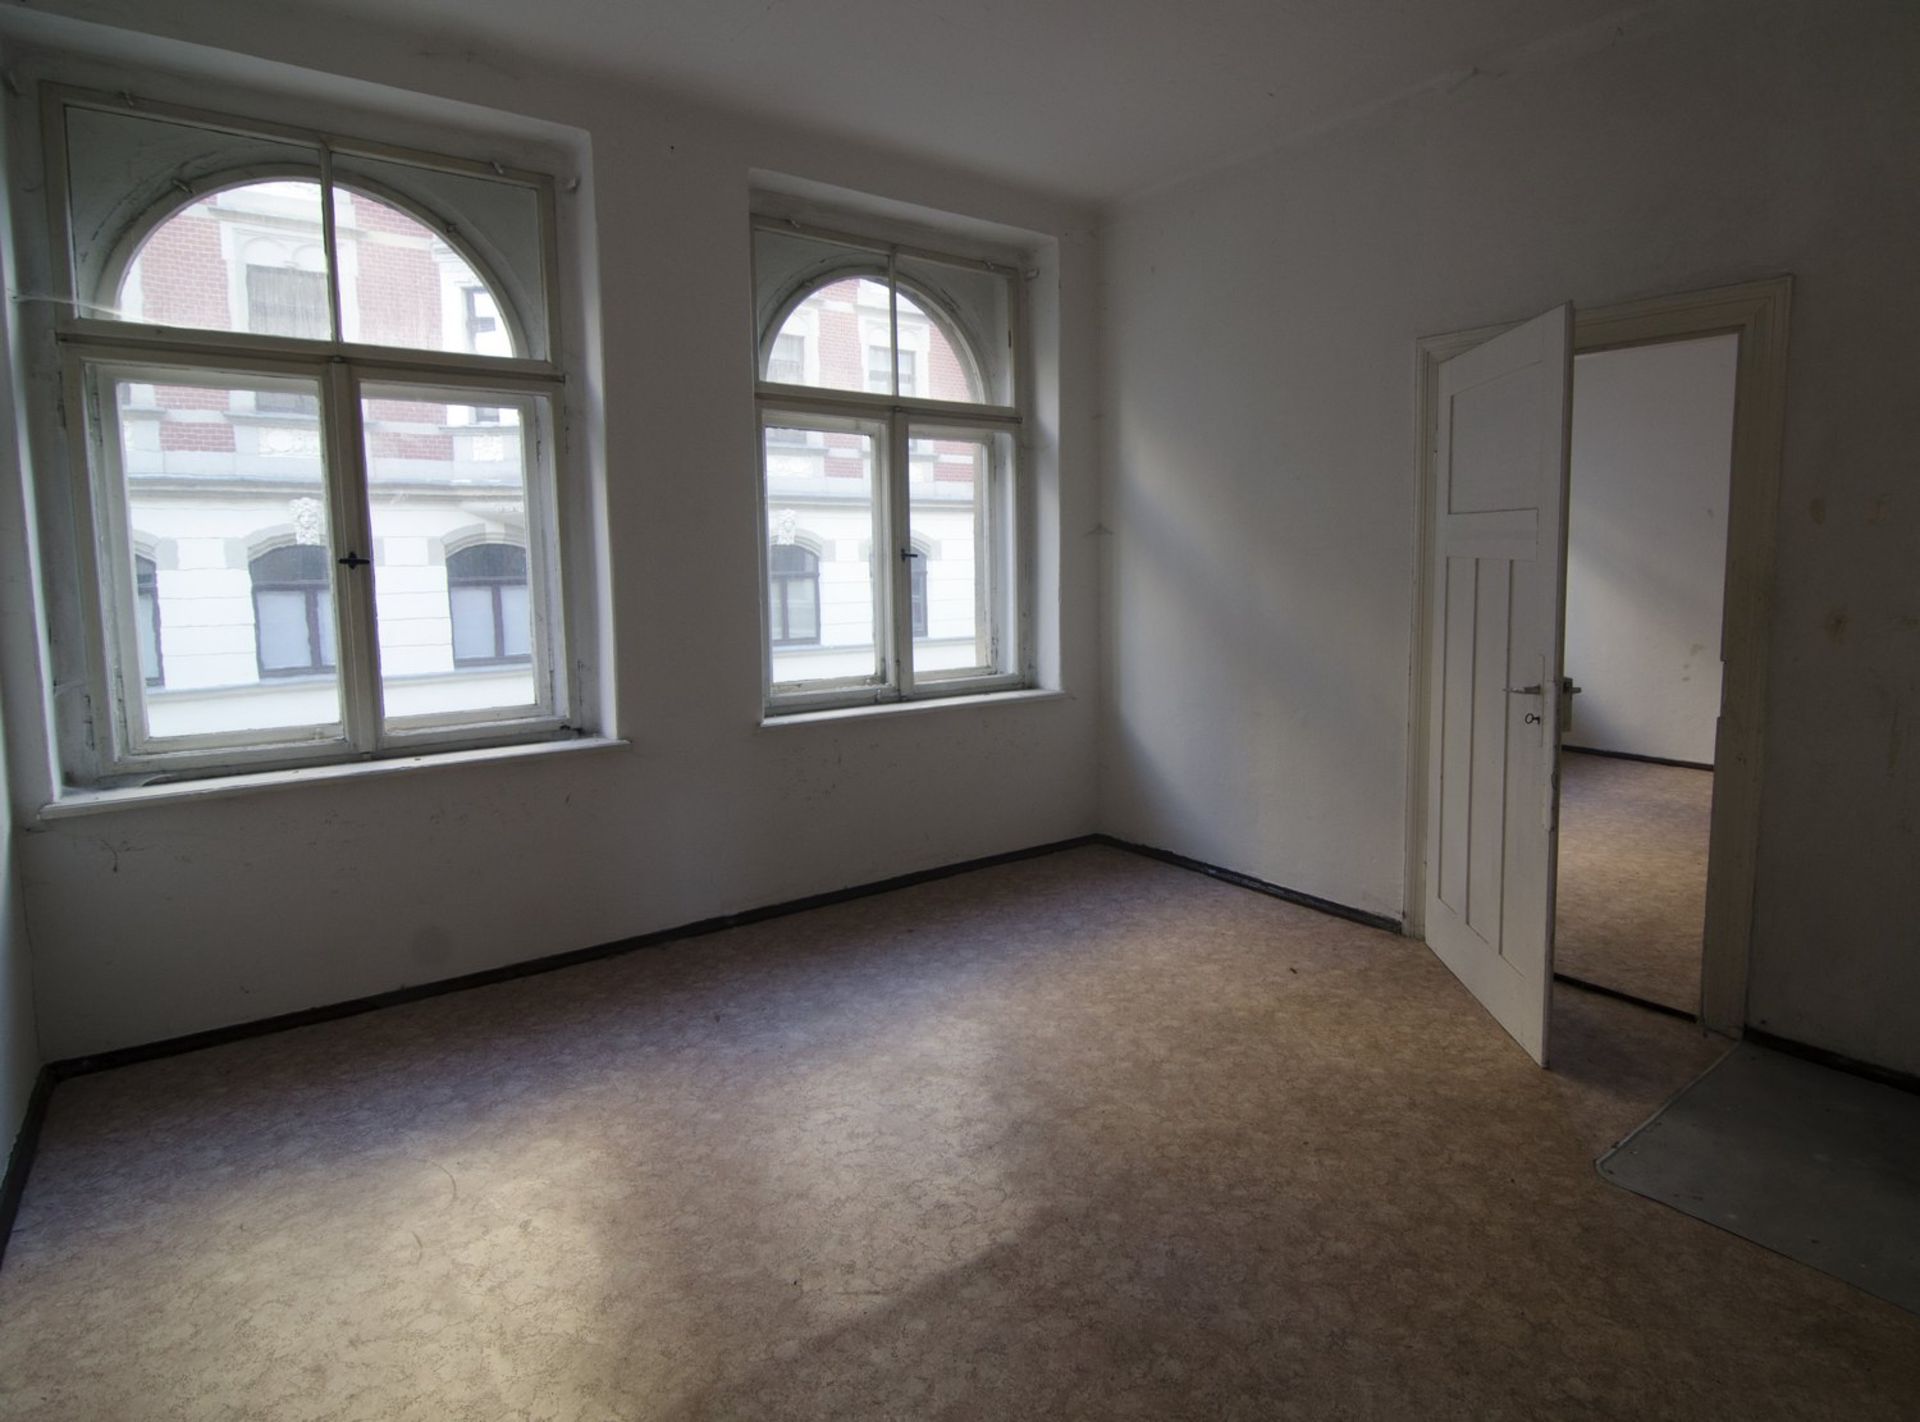 4 STOREY GERMANY APARTMENT BLOCK IN ADDITION TO A FULL BASEMENT + HUGE ATTIC! - Image 34 of 76